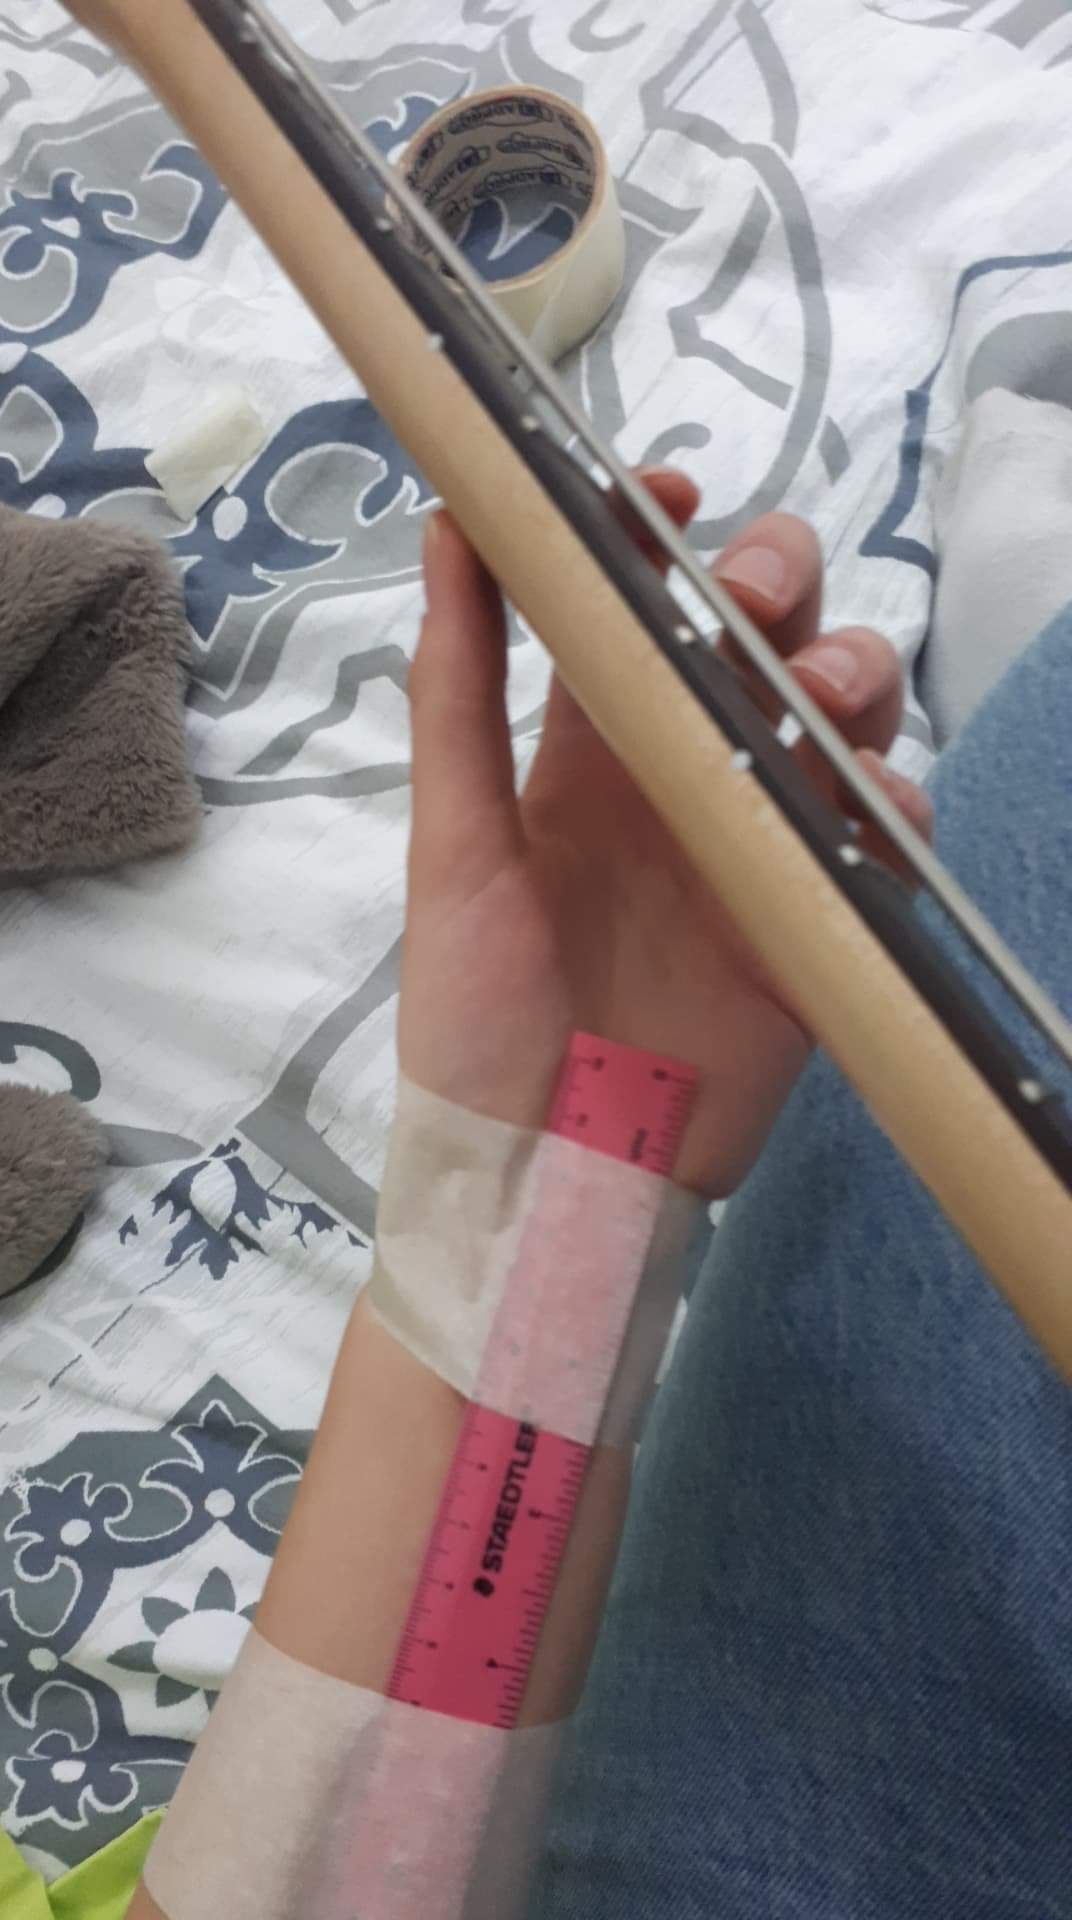 I told my student to keep her wrist straight while playing Bass/Guitar ... and thats what she came up with. I can't say i'm not impressed